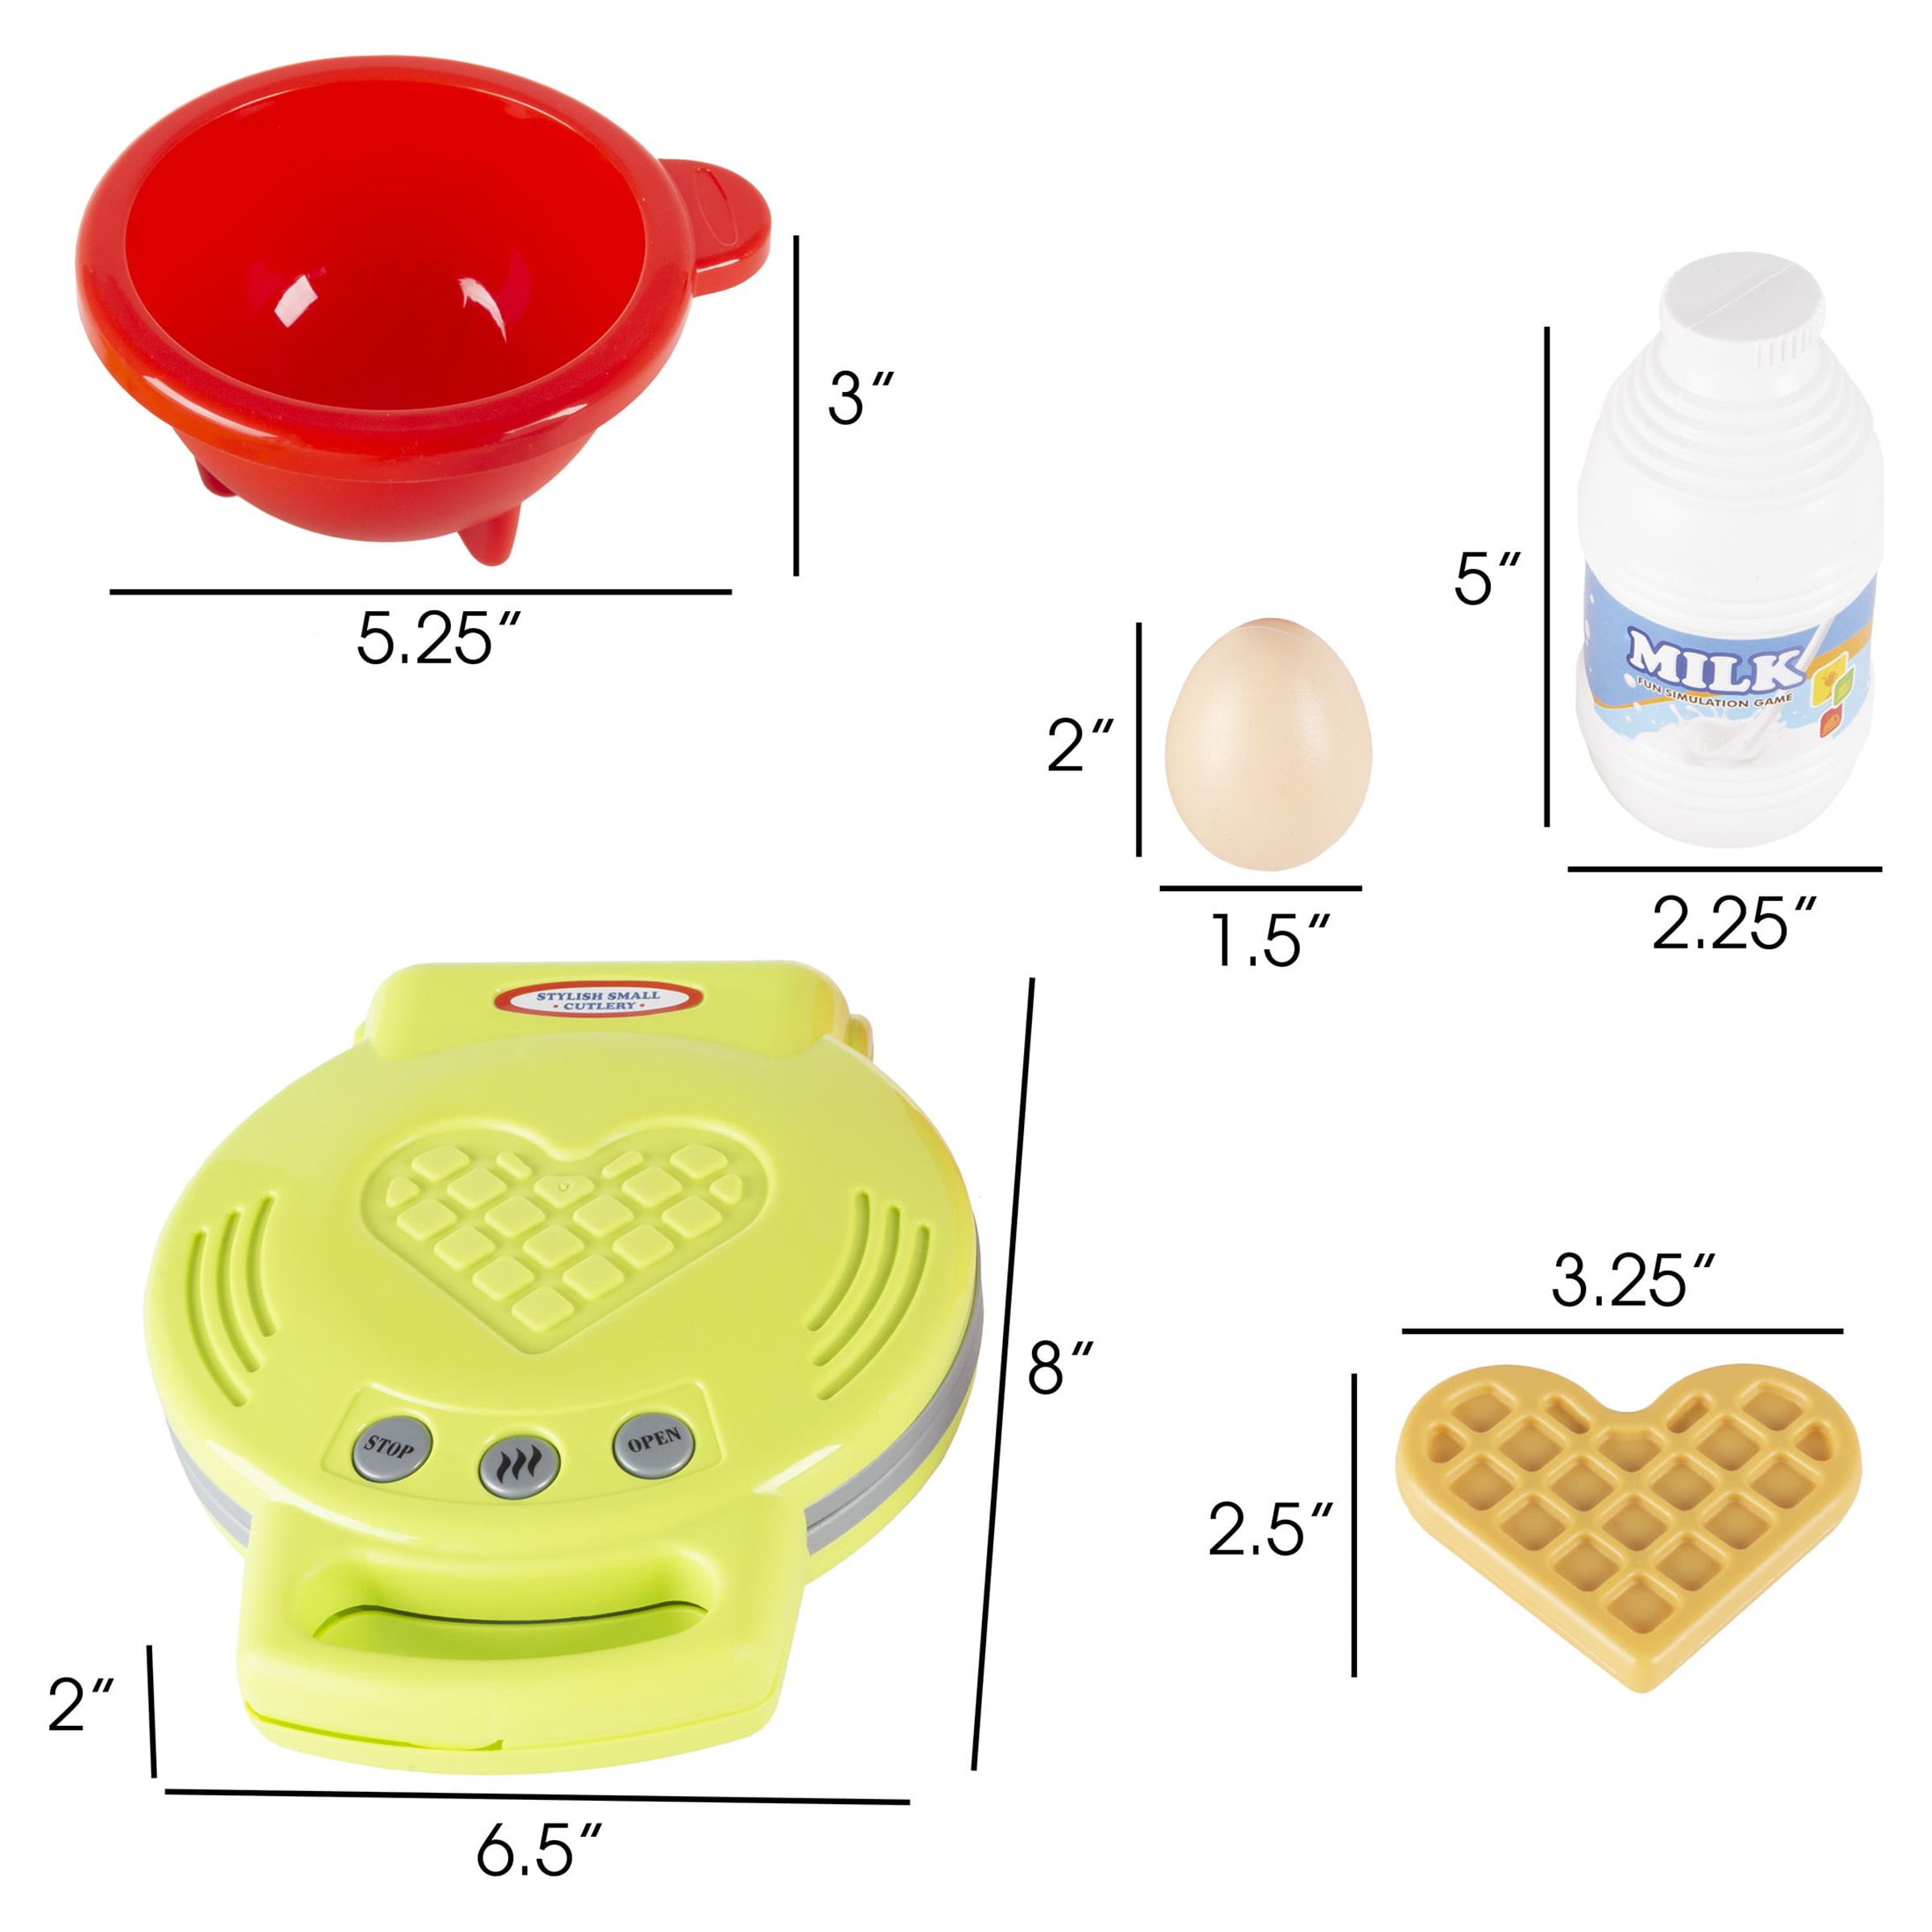 Kids Toy Waffle Iron Set with Music and Lights - Fun Pretend Play Waffle Making Kit by Hey! Play! - image 2 of 7